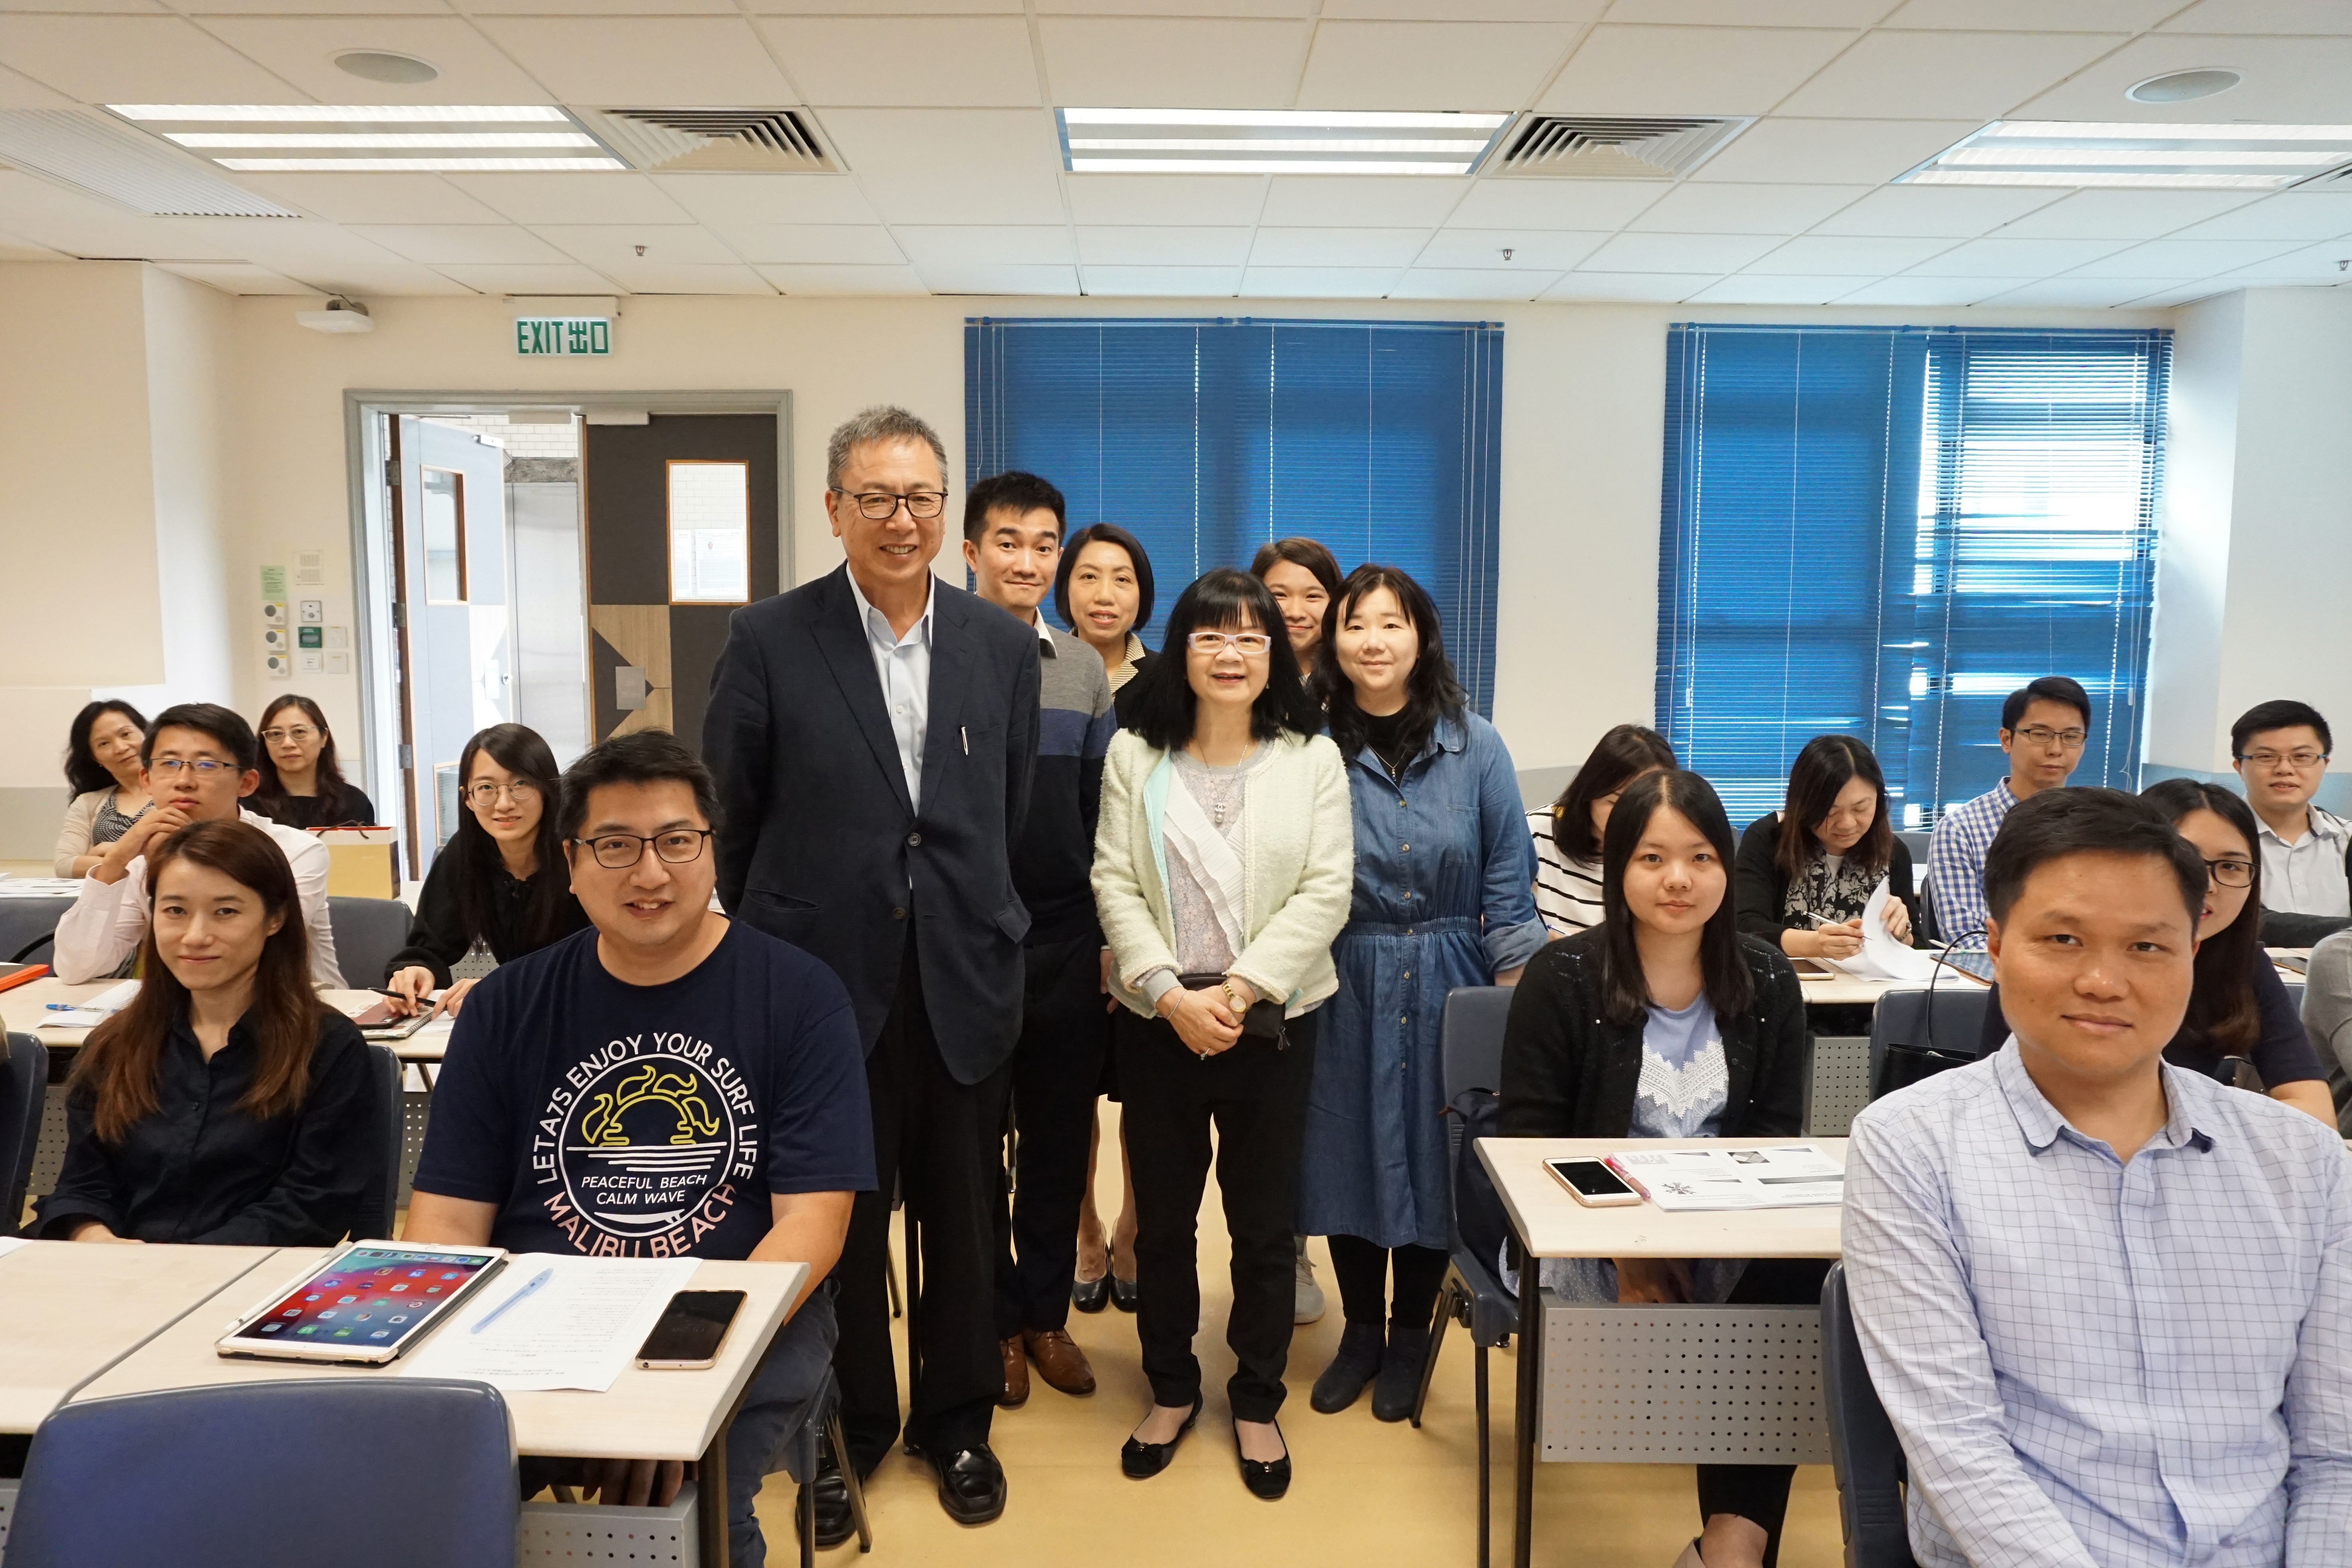 First lecture of the Train-the-Trainer Programme delivered by Dr. Hung Sifong, a psychiatrist